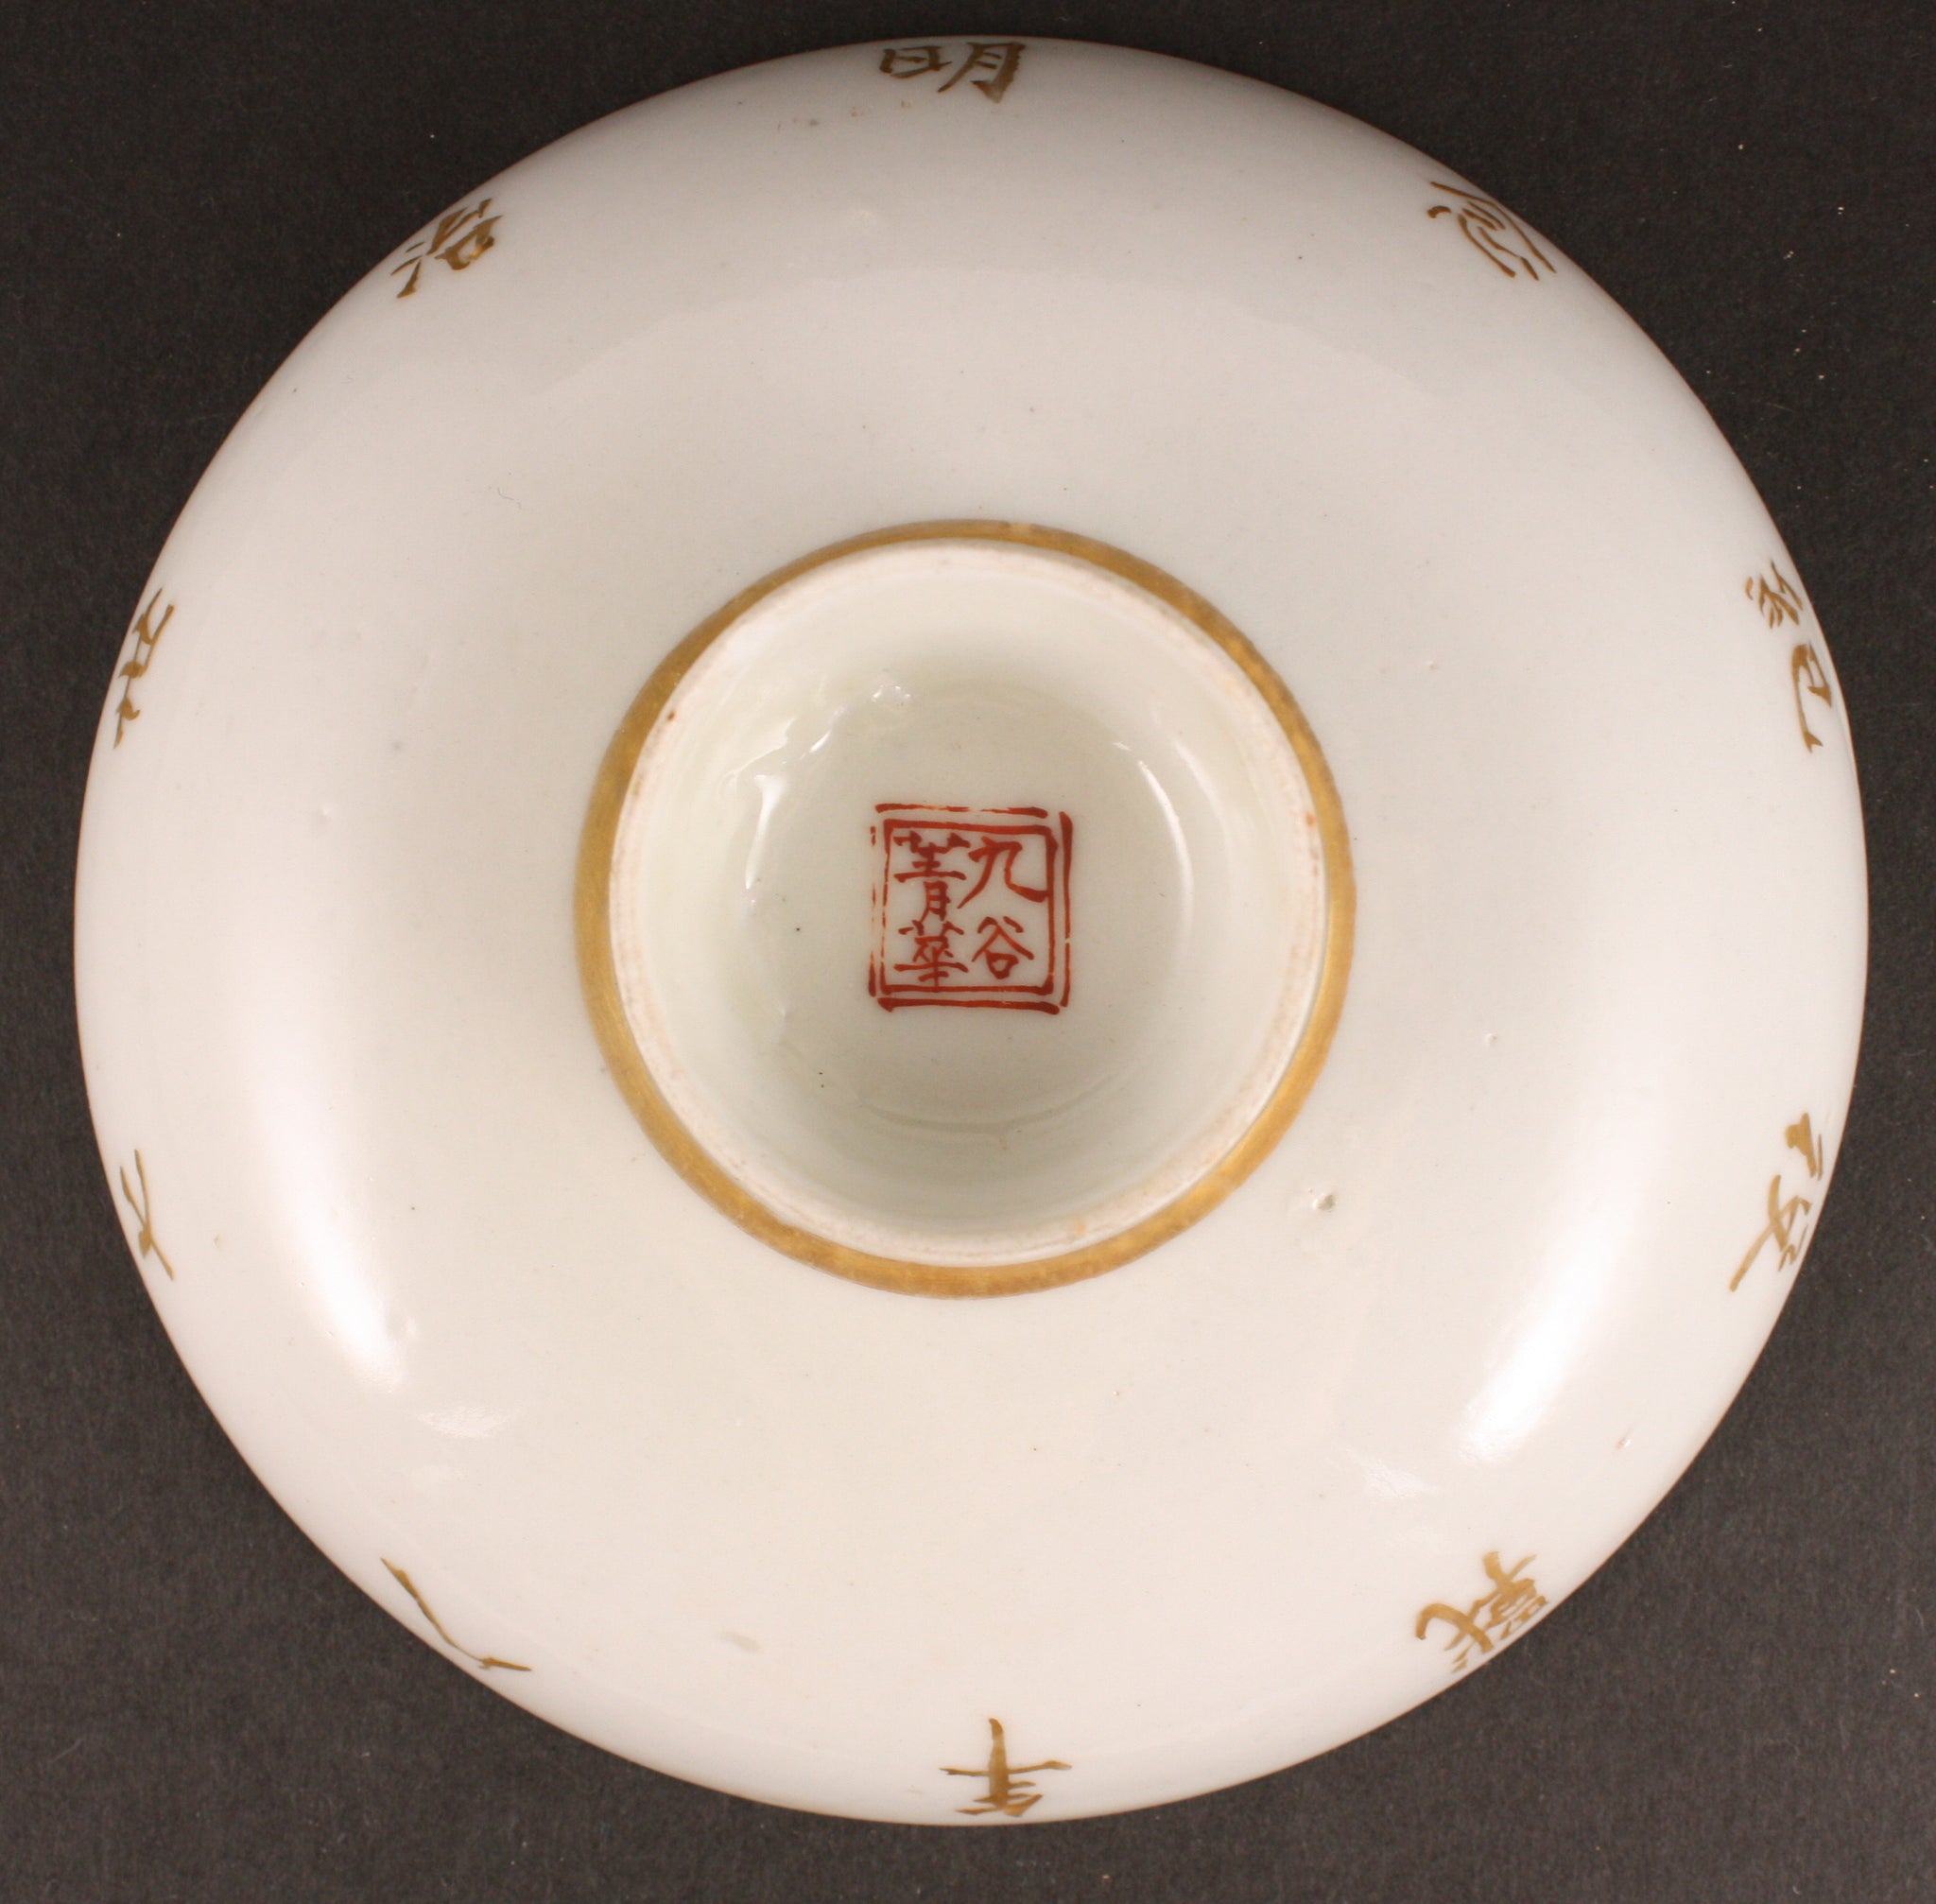 Russo Japanese War Victory Imperial Edict Commemorative Army Sake Cup